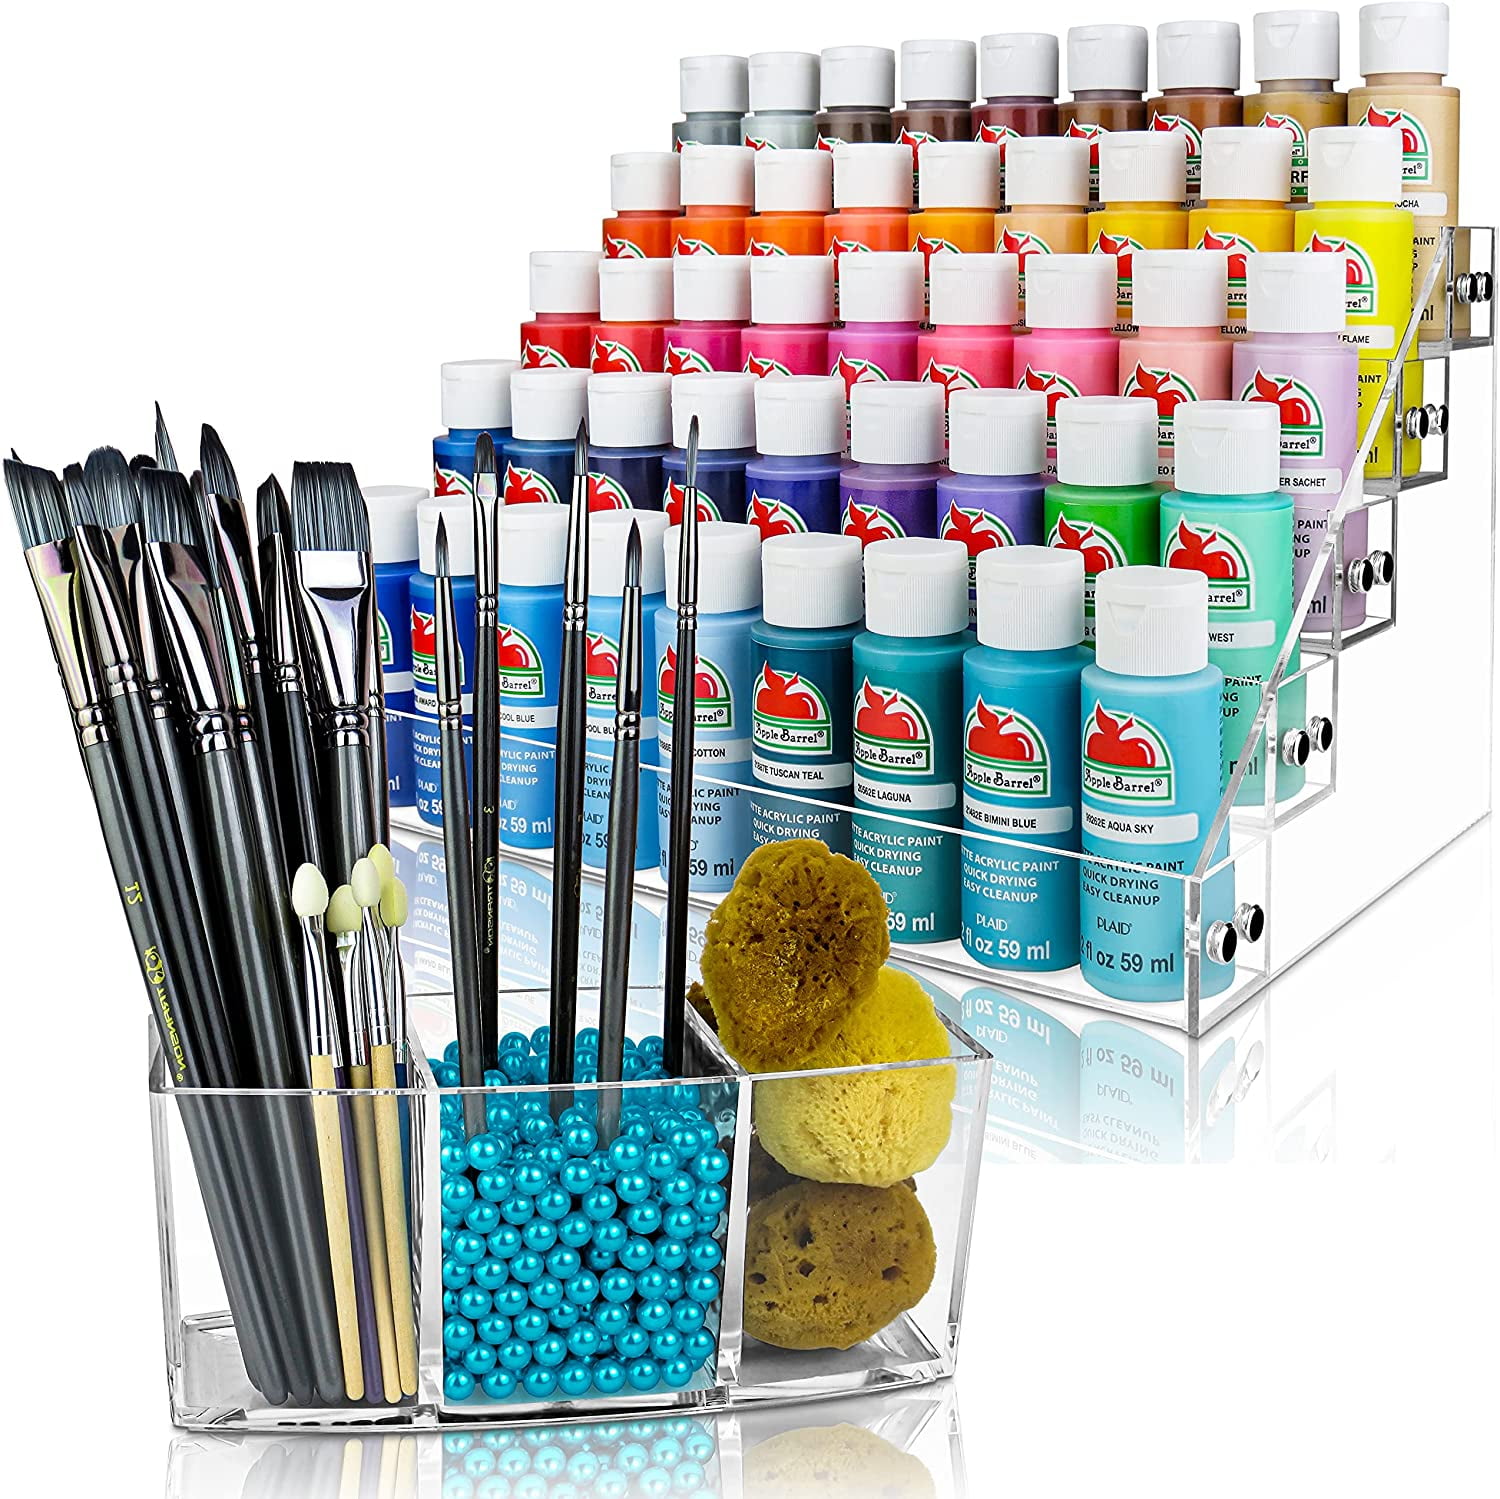 Paint Brushes Pens Storage Holder Rack Organizer for Painting Crafts DIY